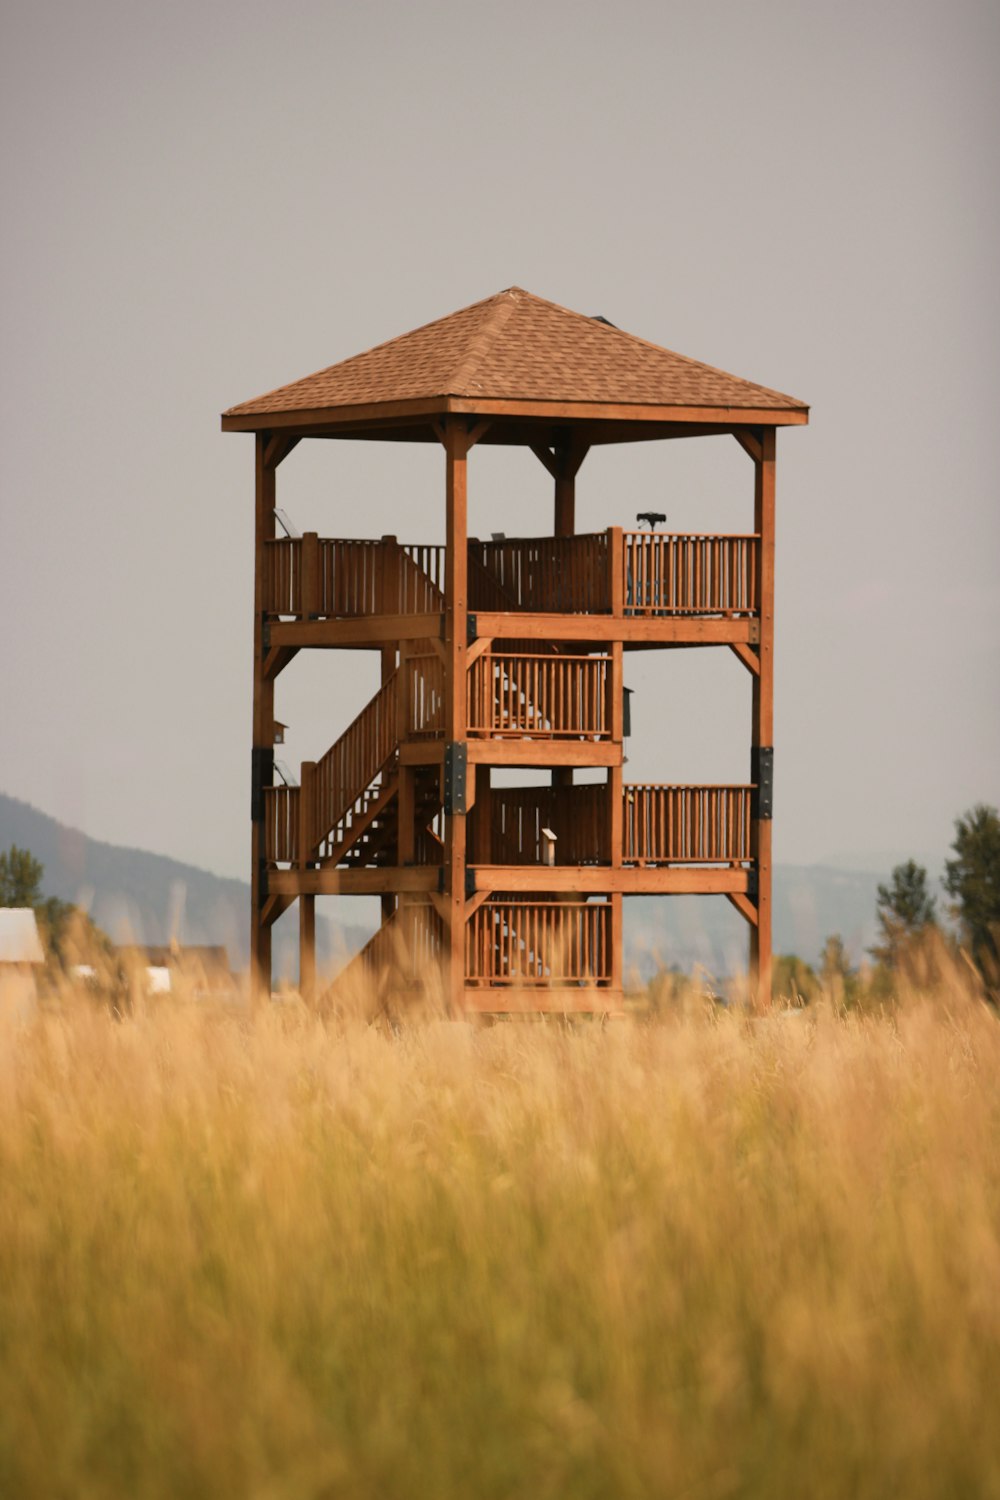 a wooden structure in a field with tall grass